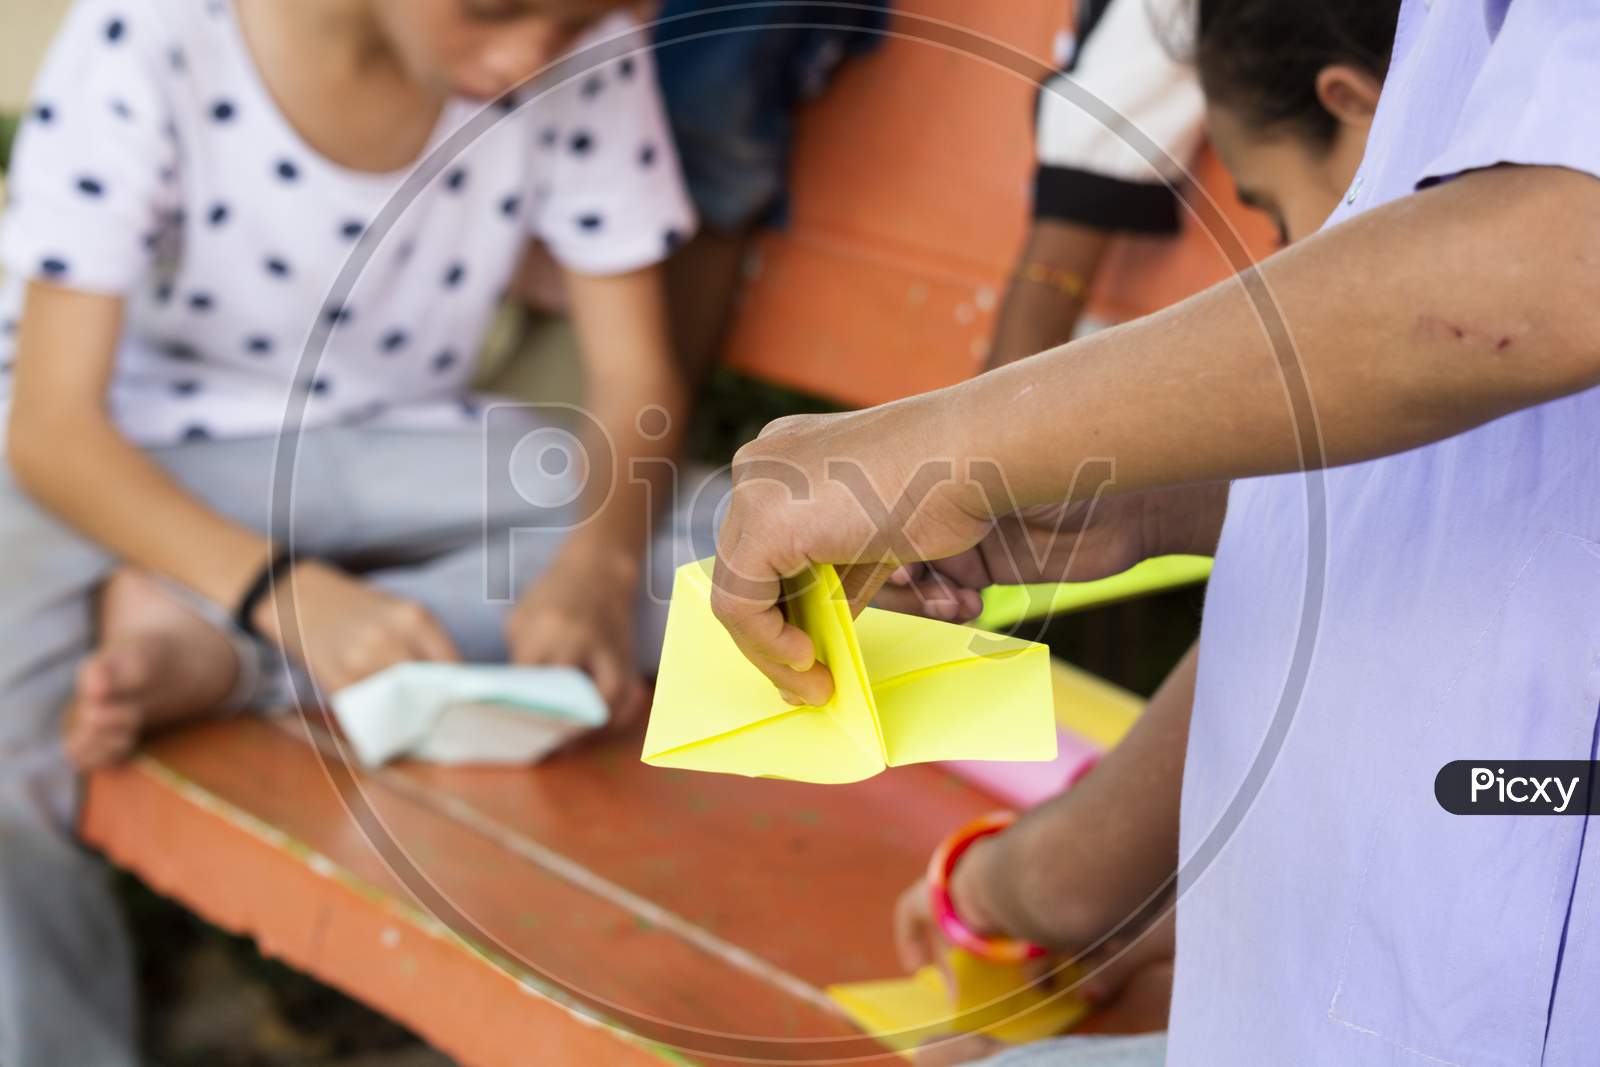 Children's Making Paper Rockets to Play Paper Rockets Game At a Park, Outdoors - Kids Playing Outside During Leisure.